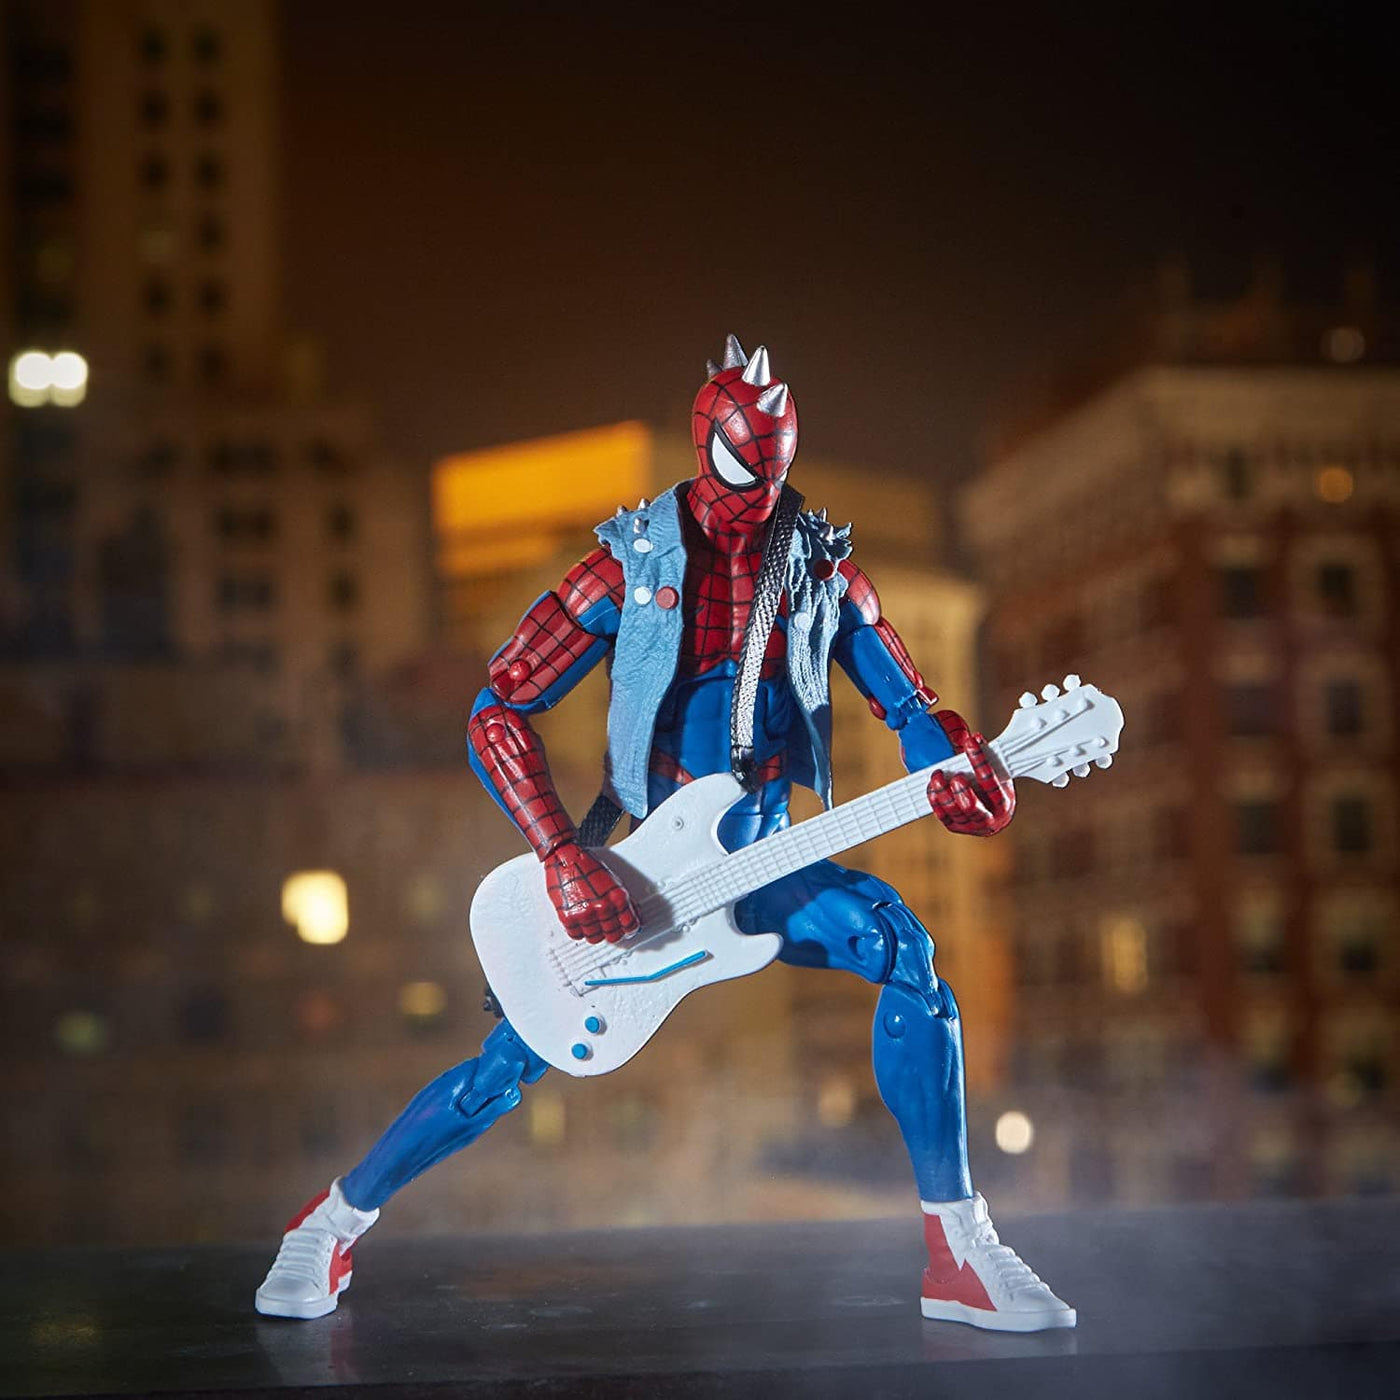 Spider-Punk: Legends Series Spider Man - 6 inch | Hasbro by Hasbro, USA Toys